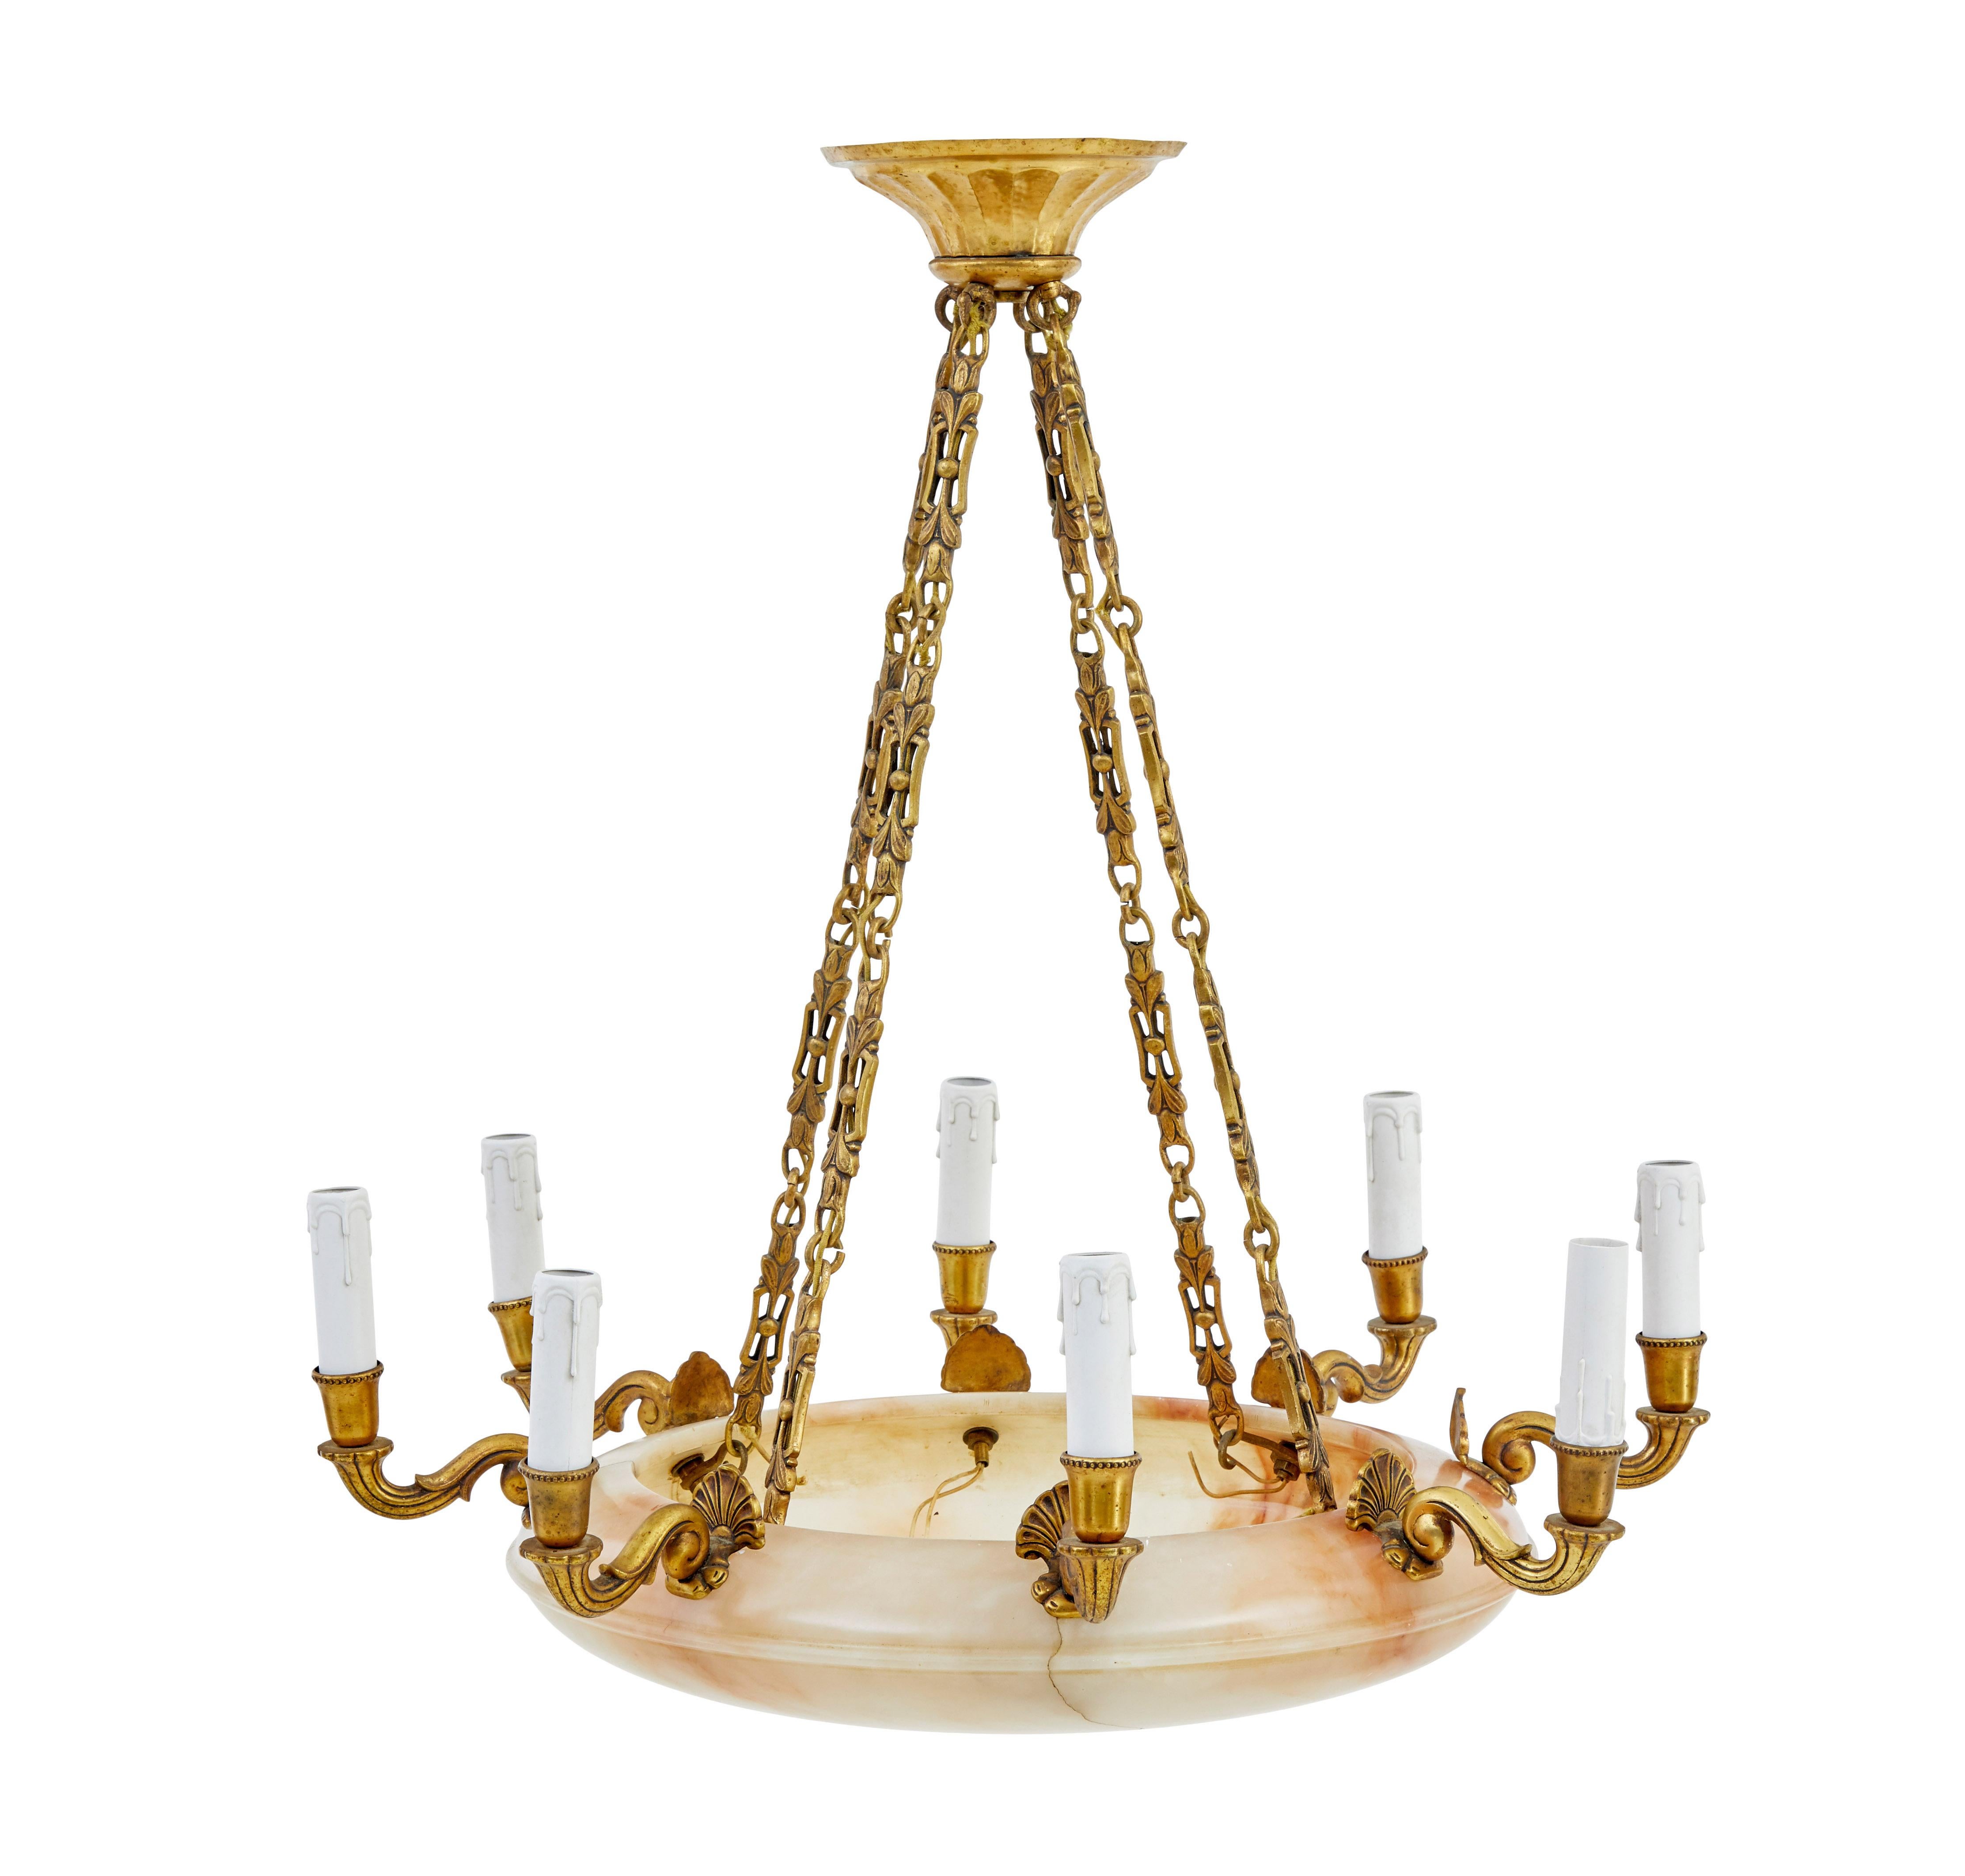 Fine quality art deco period art deco alabaster ceiling light circa 1920.

8 arm chandelier with light fitments and faux candle covers. 4 bulb holders inside the bowl to illuminate the stone. Suspended by 4 heavy decorative chains leading up to the